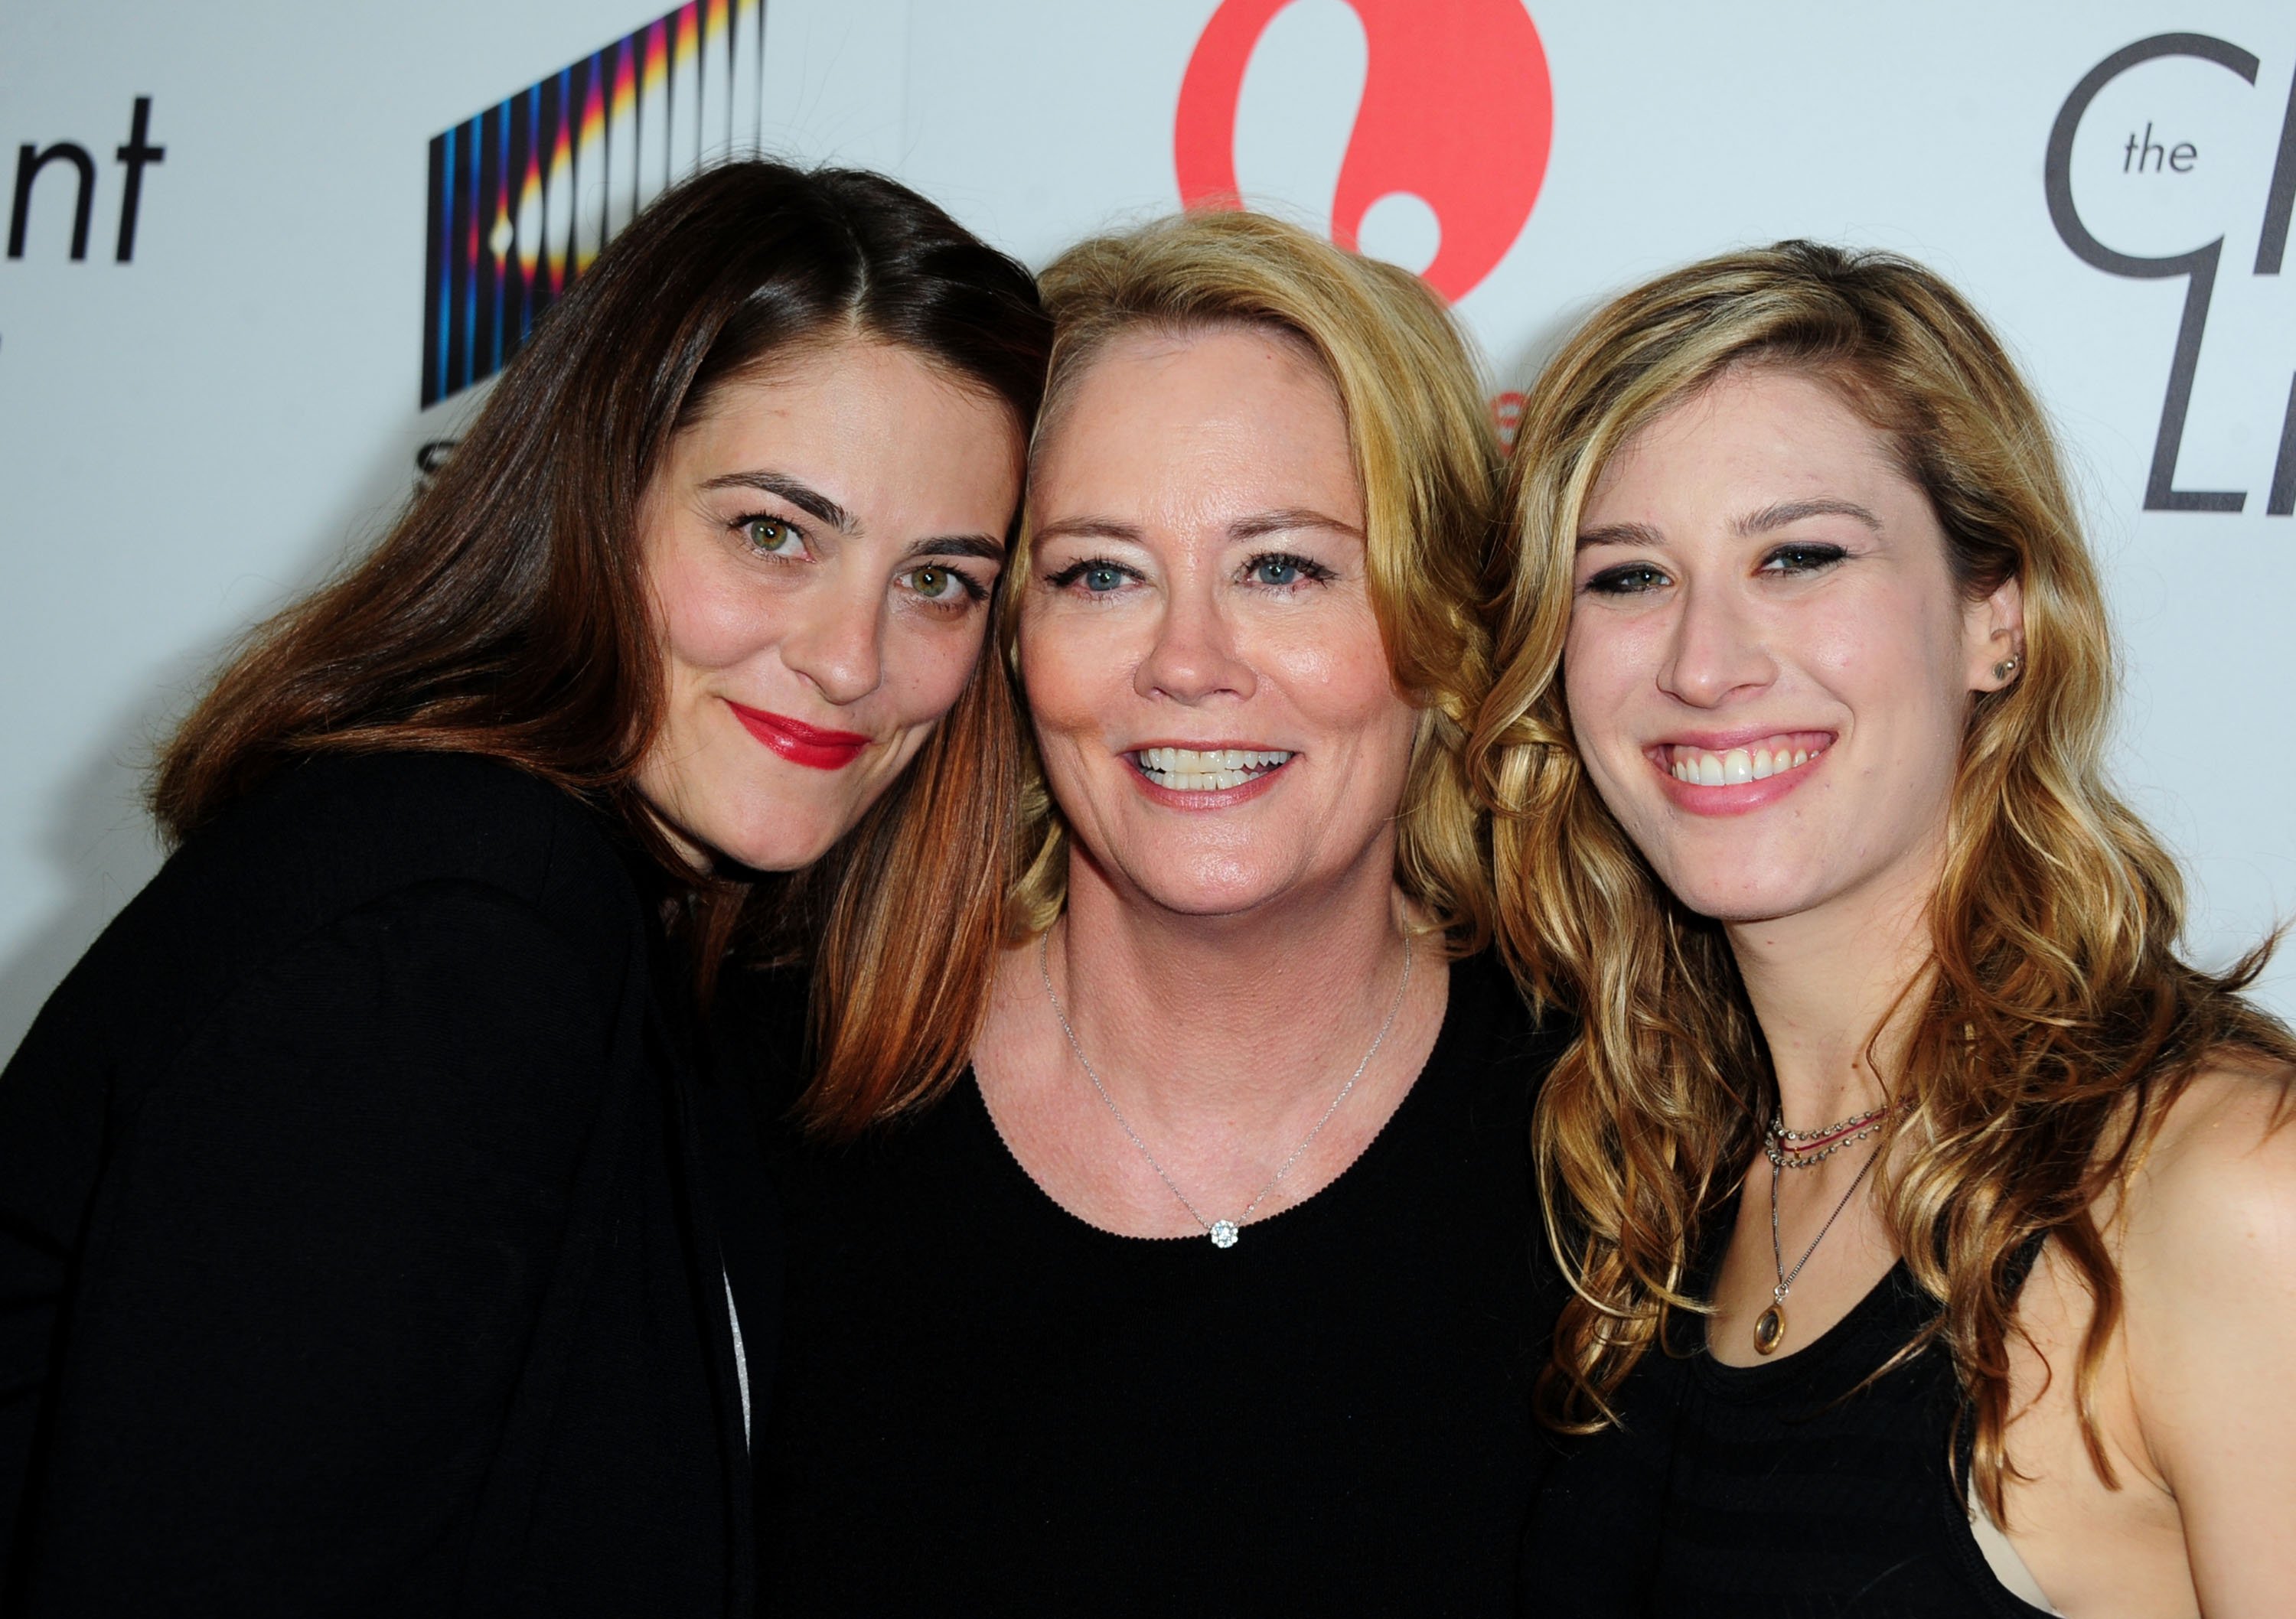 Clementine Ford, Cybill Shepherd, and Ariel Oppenheim at the launch party for "The Client List" on April 4, 2012, in West Hollywood, California | Source: Getty Images